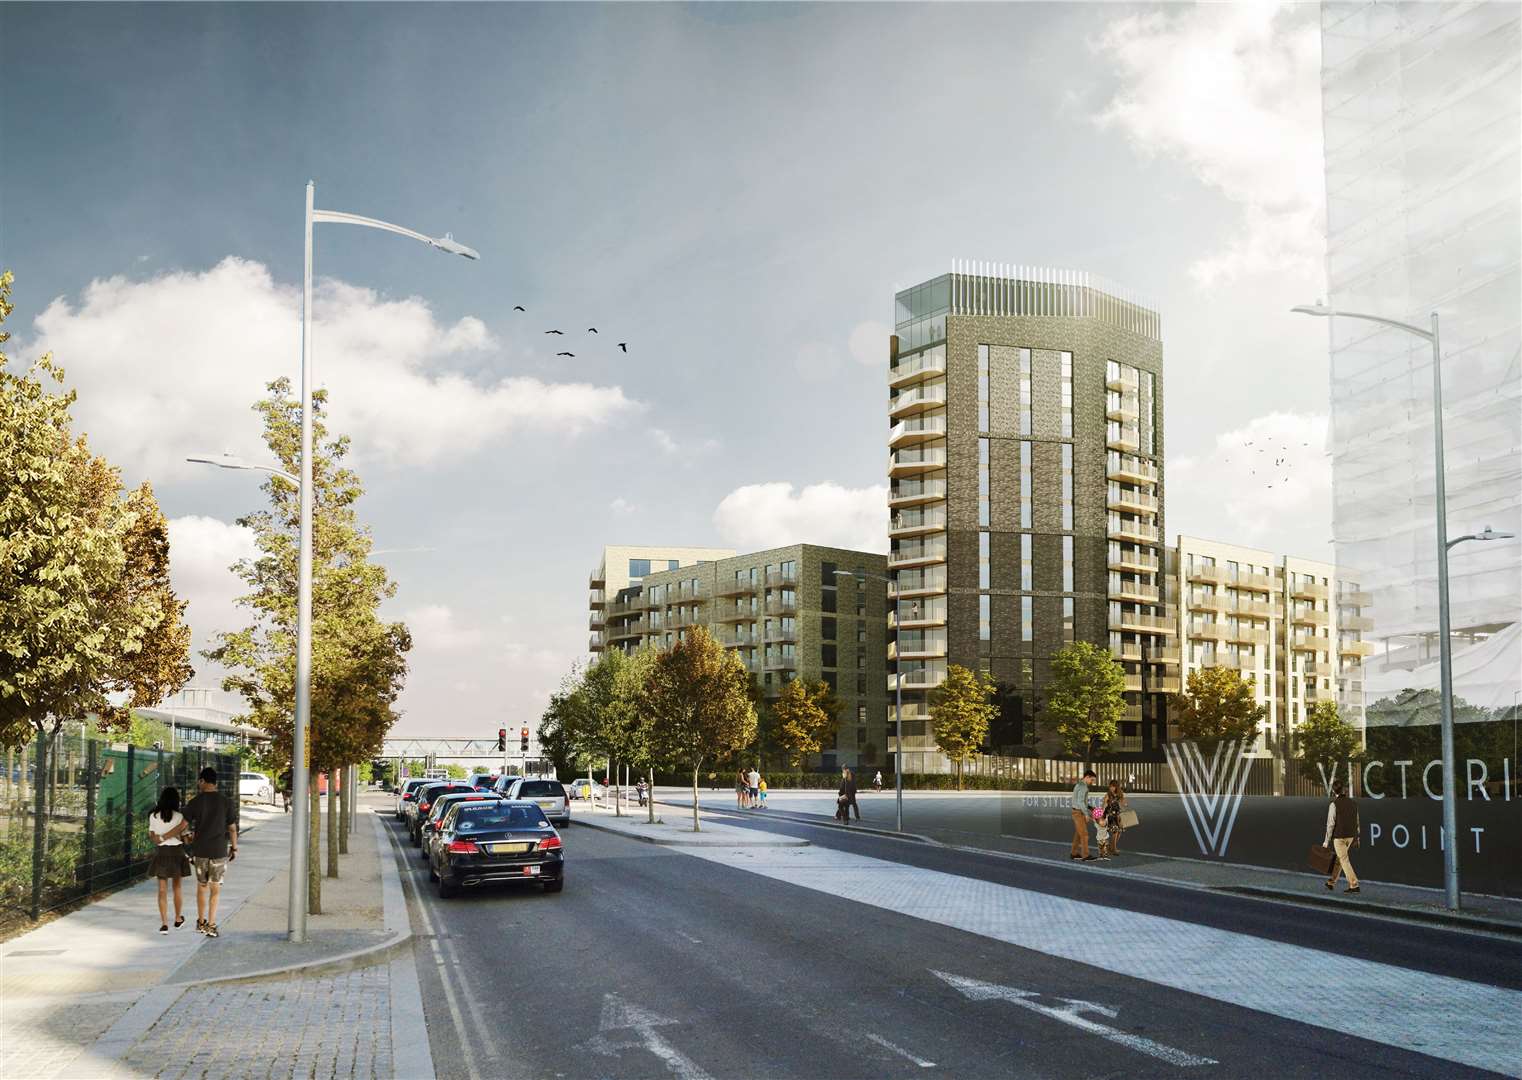 The tallest block of the development, as has been visualised from Victoria Road, would be more than 16 storeys tall